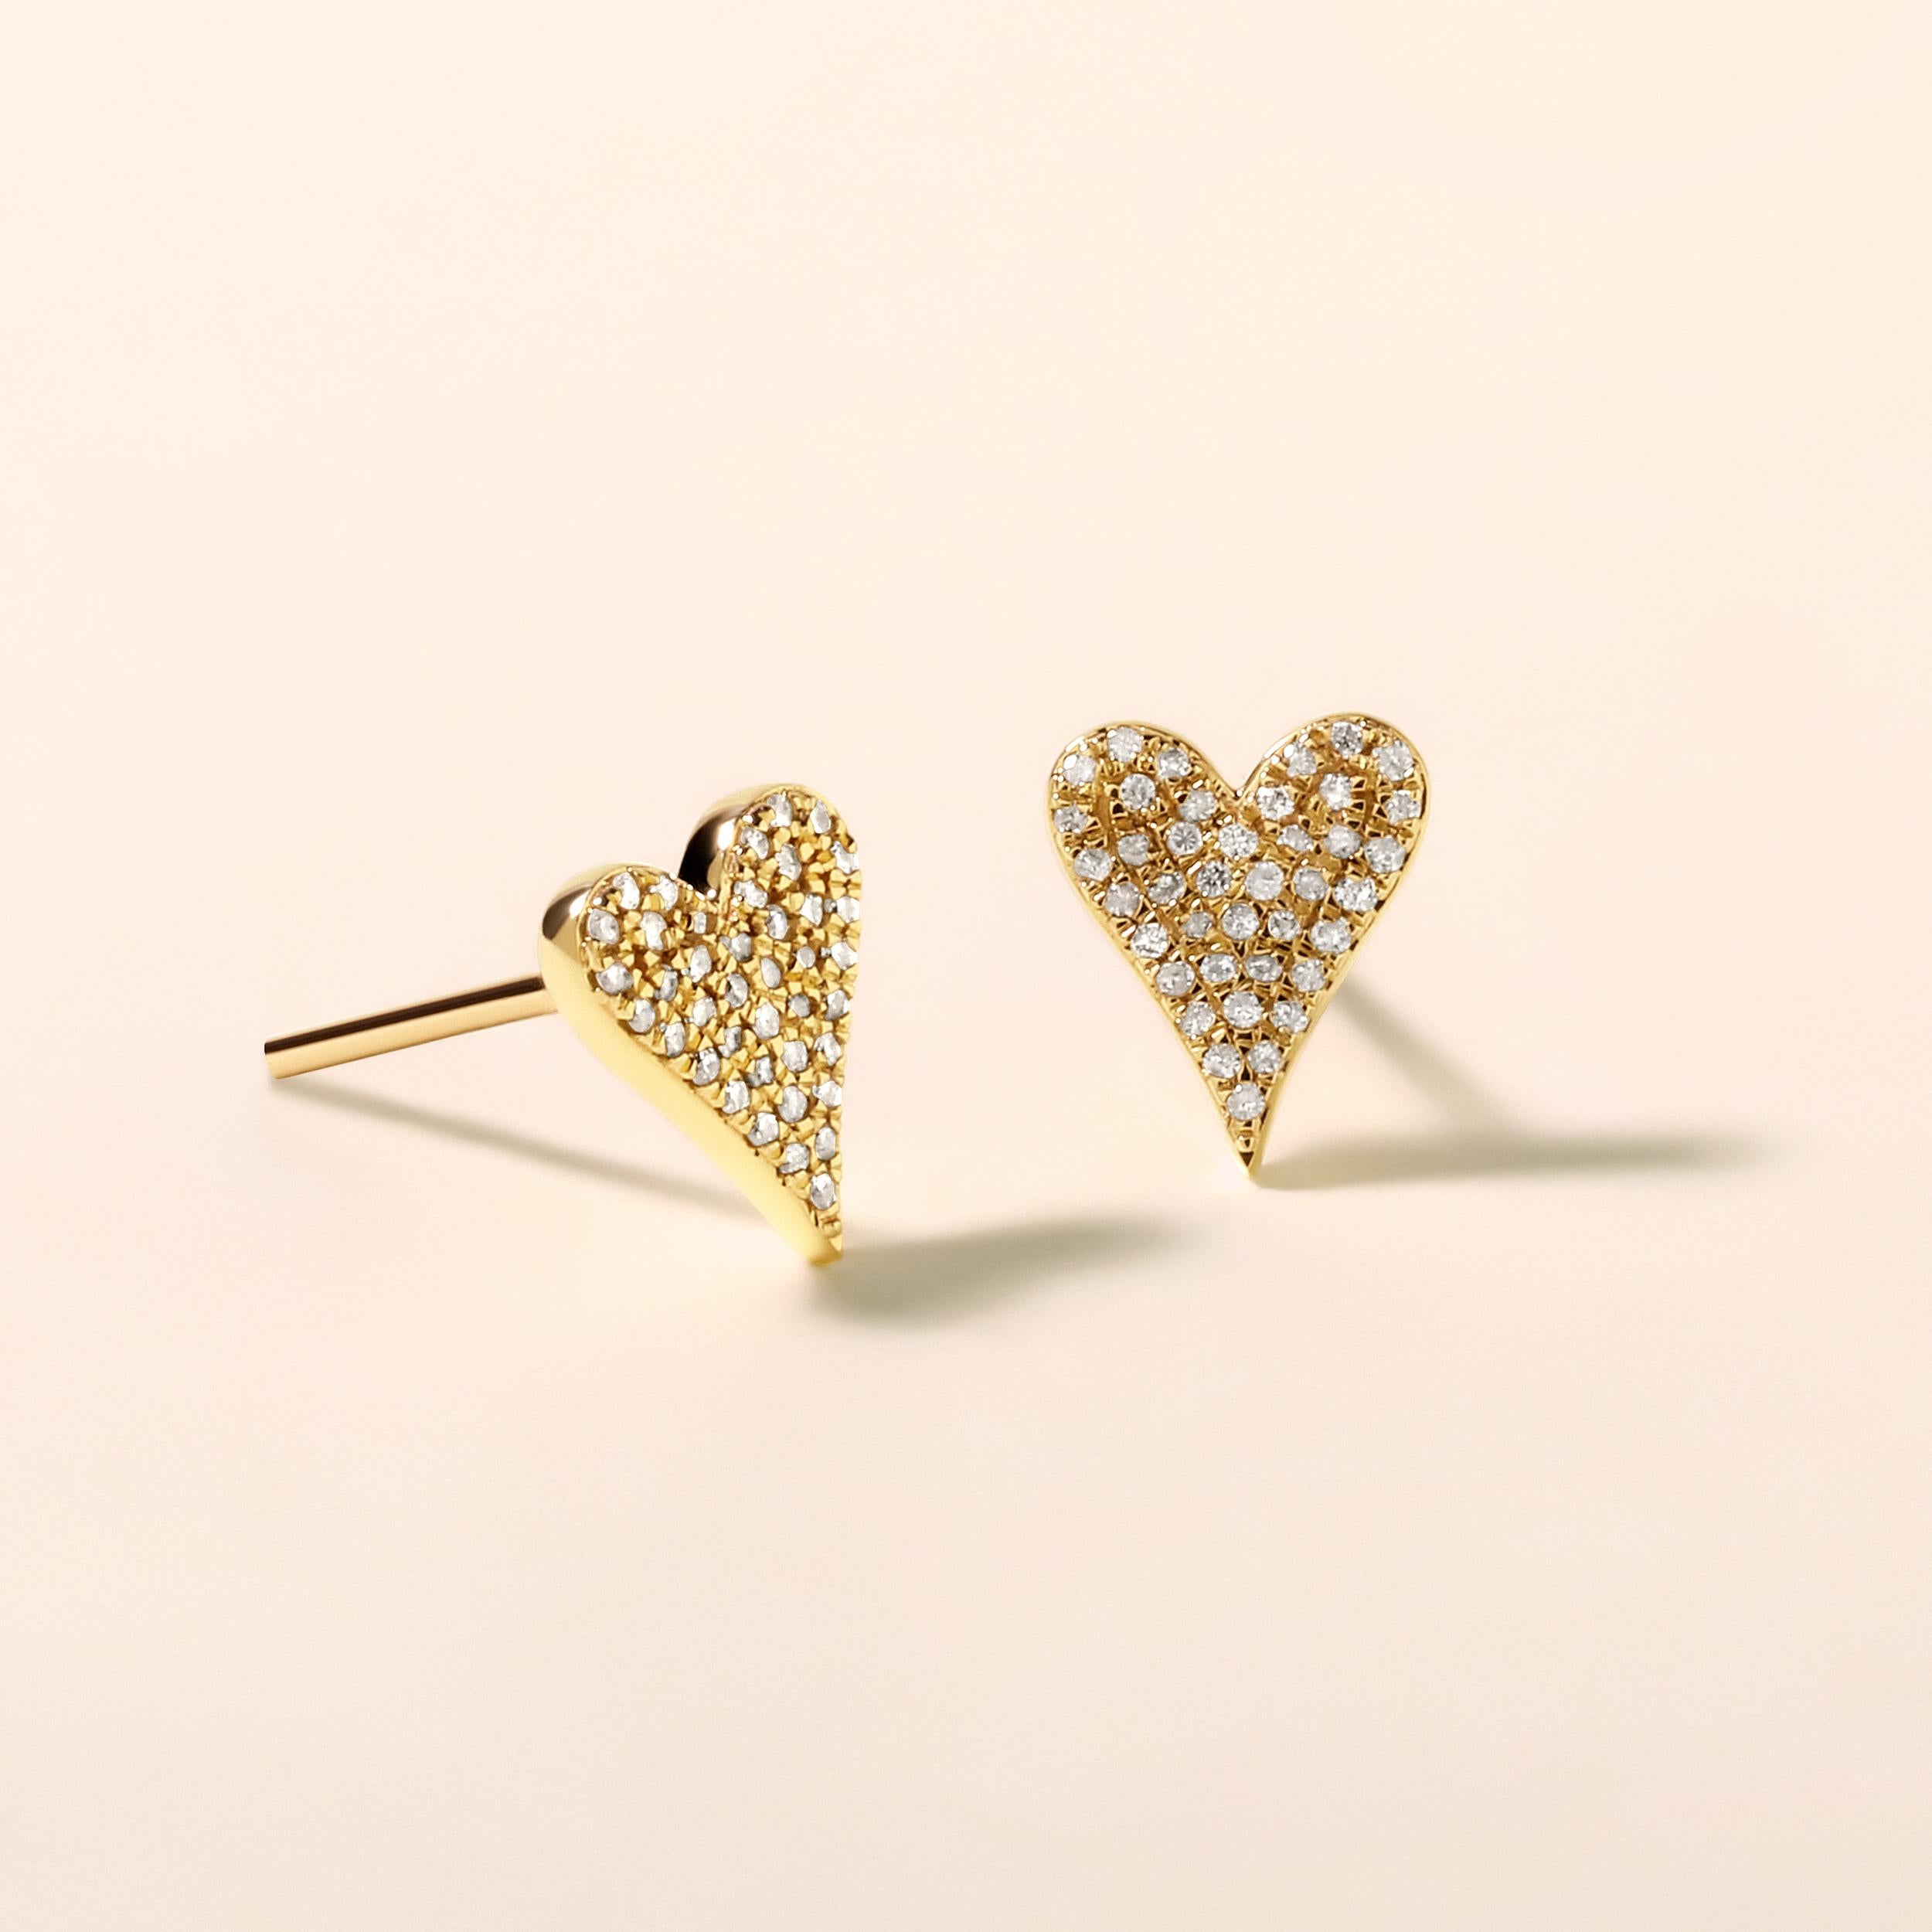 Crafted in 1.55 grams of 14K Yellow Gold, the earrings contains 80 stones of Round Diamonds with a total of 0.15 carat in F-G color and I1-I2 clarity.

This jewelry piece will be expertly crafted by our skilled artisans upon order. Allow us a